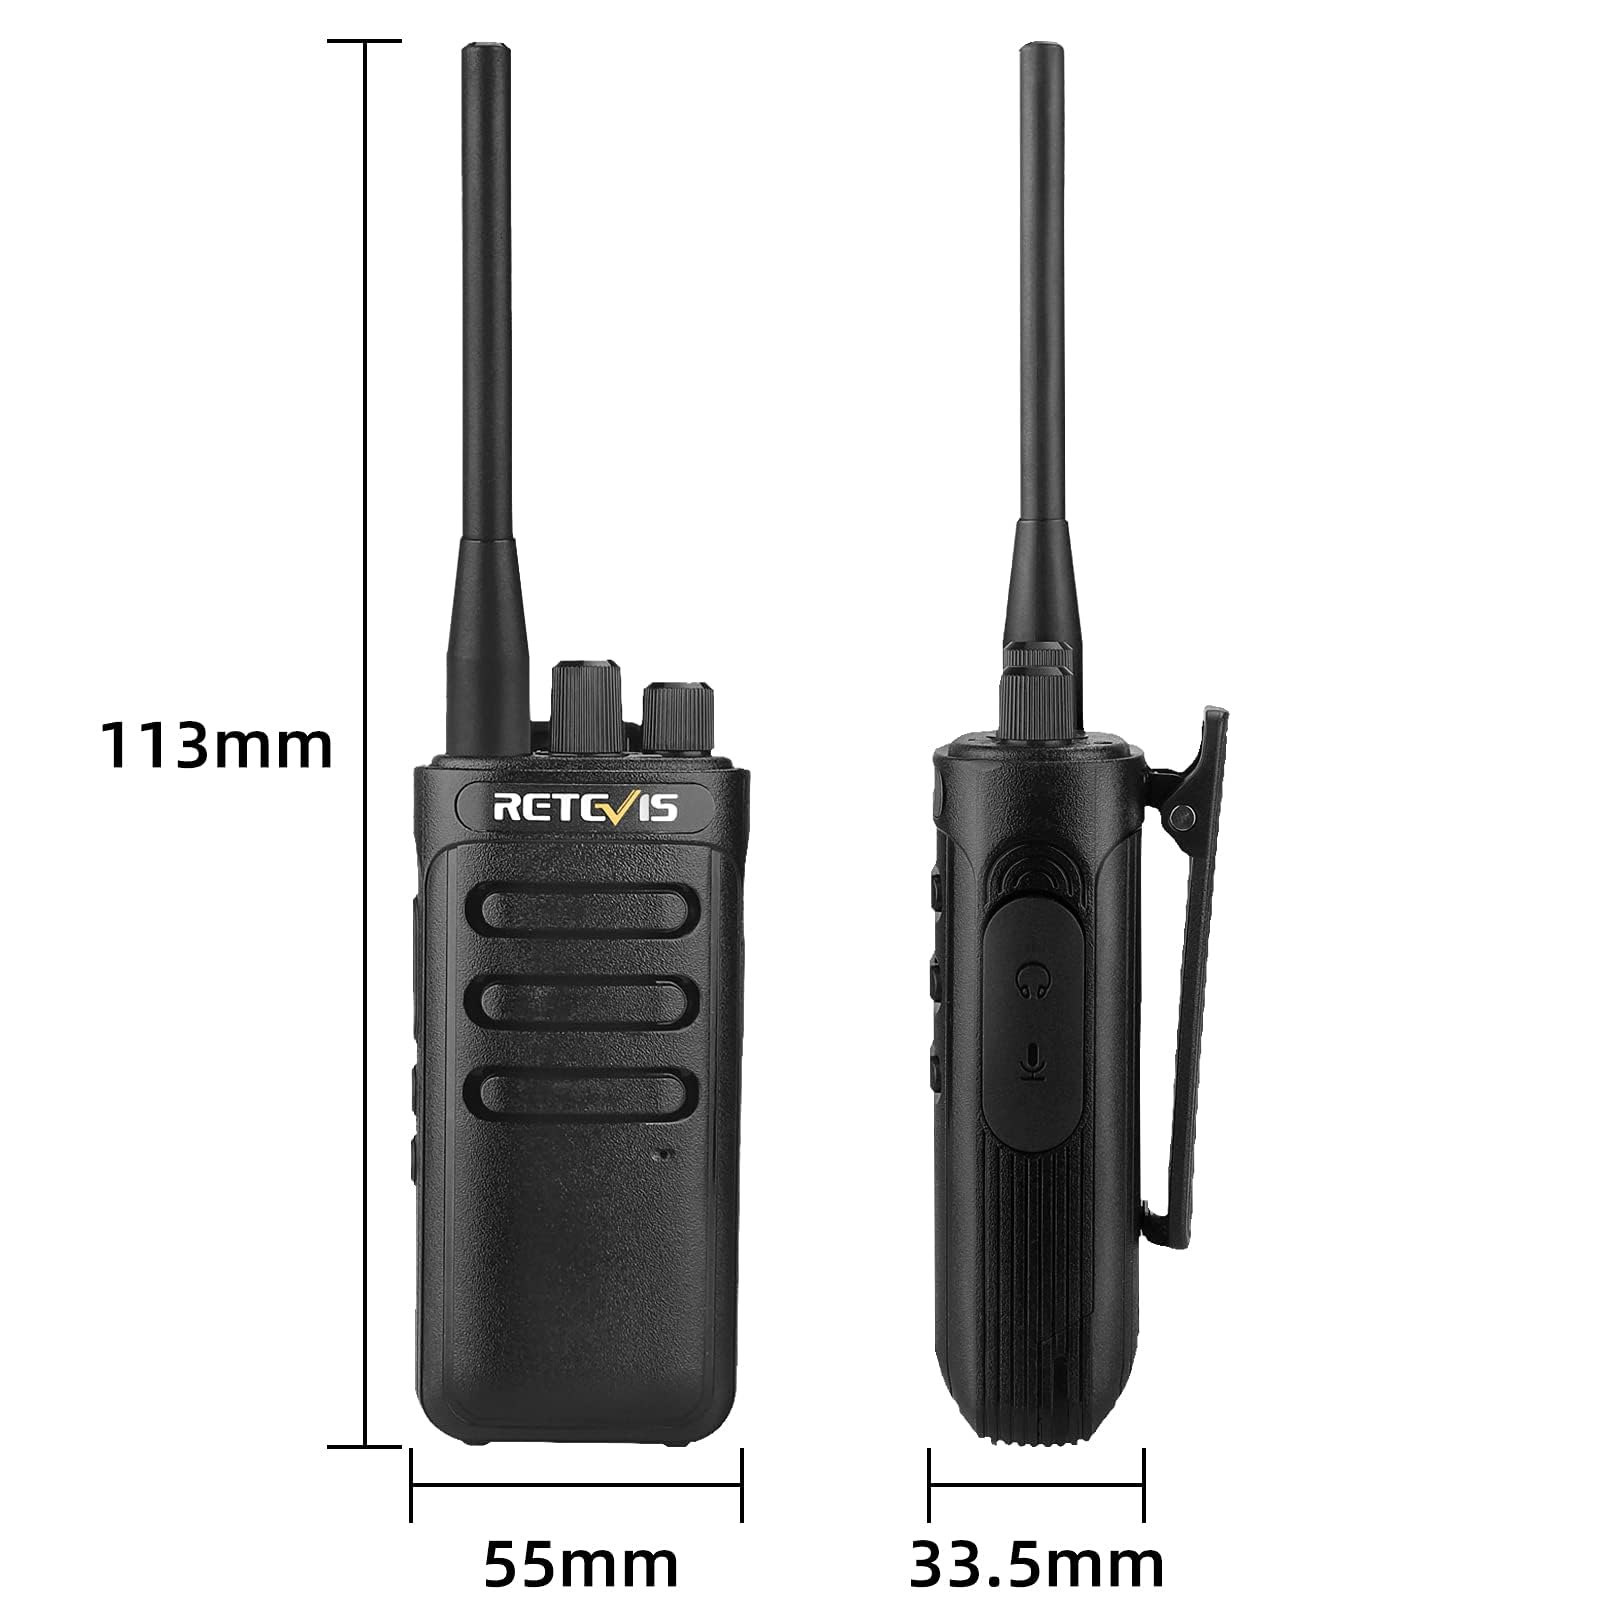 Retevis RB85 Long Range Walkie Talkies, High Power 2 Way Radios with Shoulder Mic, Long Distance Two Way Radios, Noise Canceling, Compact, for Work Warehouse Hotel(4 Pack)